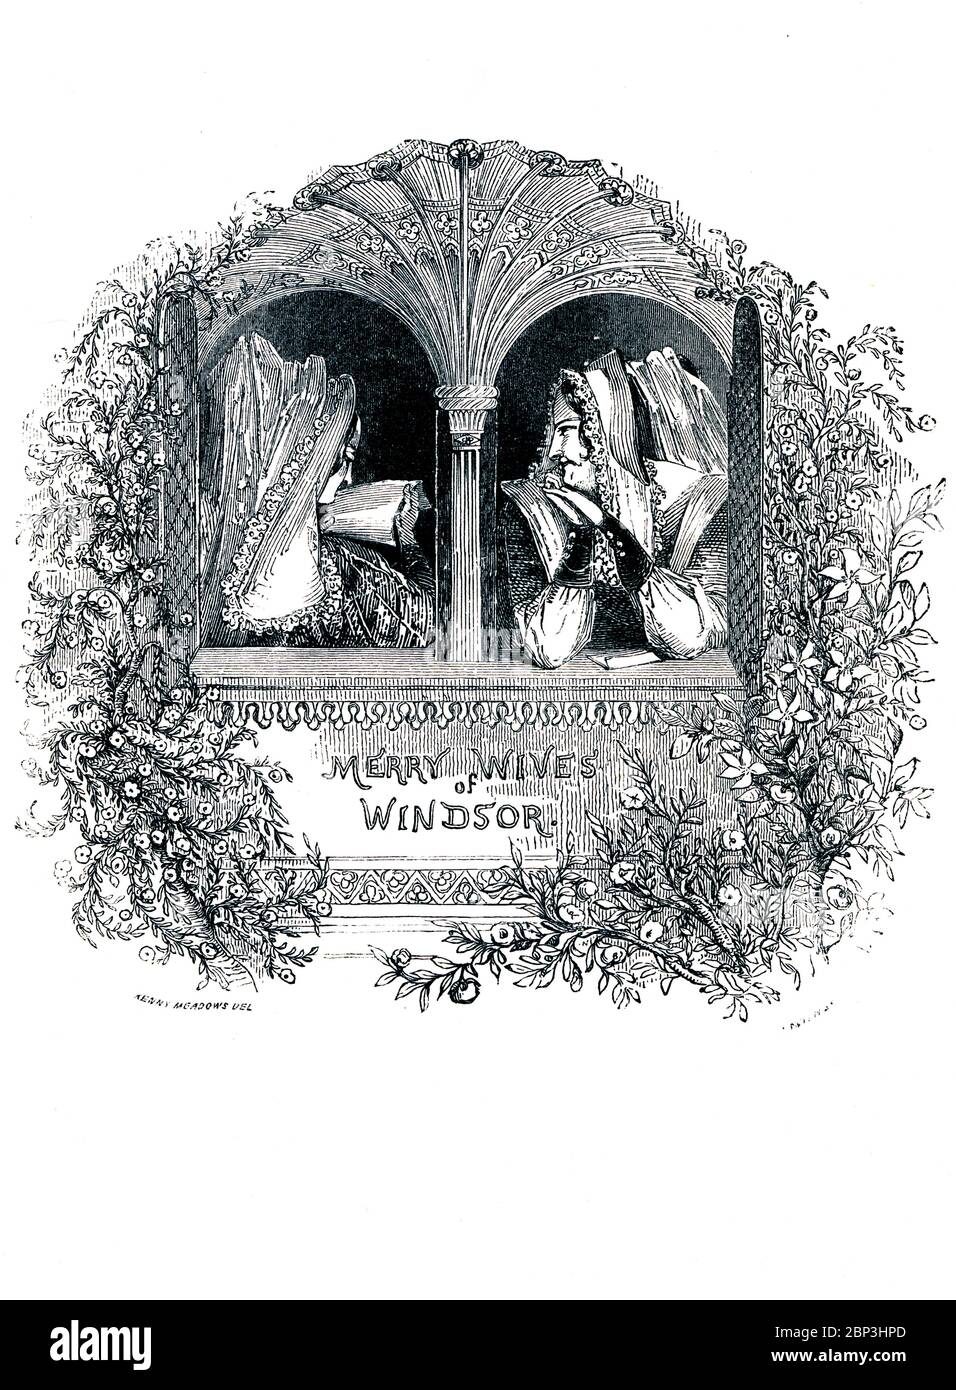 Merry Wives of Windsor Victorian book frontispiece for the comedy play by William Shakespeare about the romantic efforts of Sir John Falstaff, from the 1849 illustrated book Heroines of Shakespeare Stock Photo